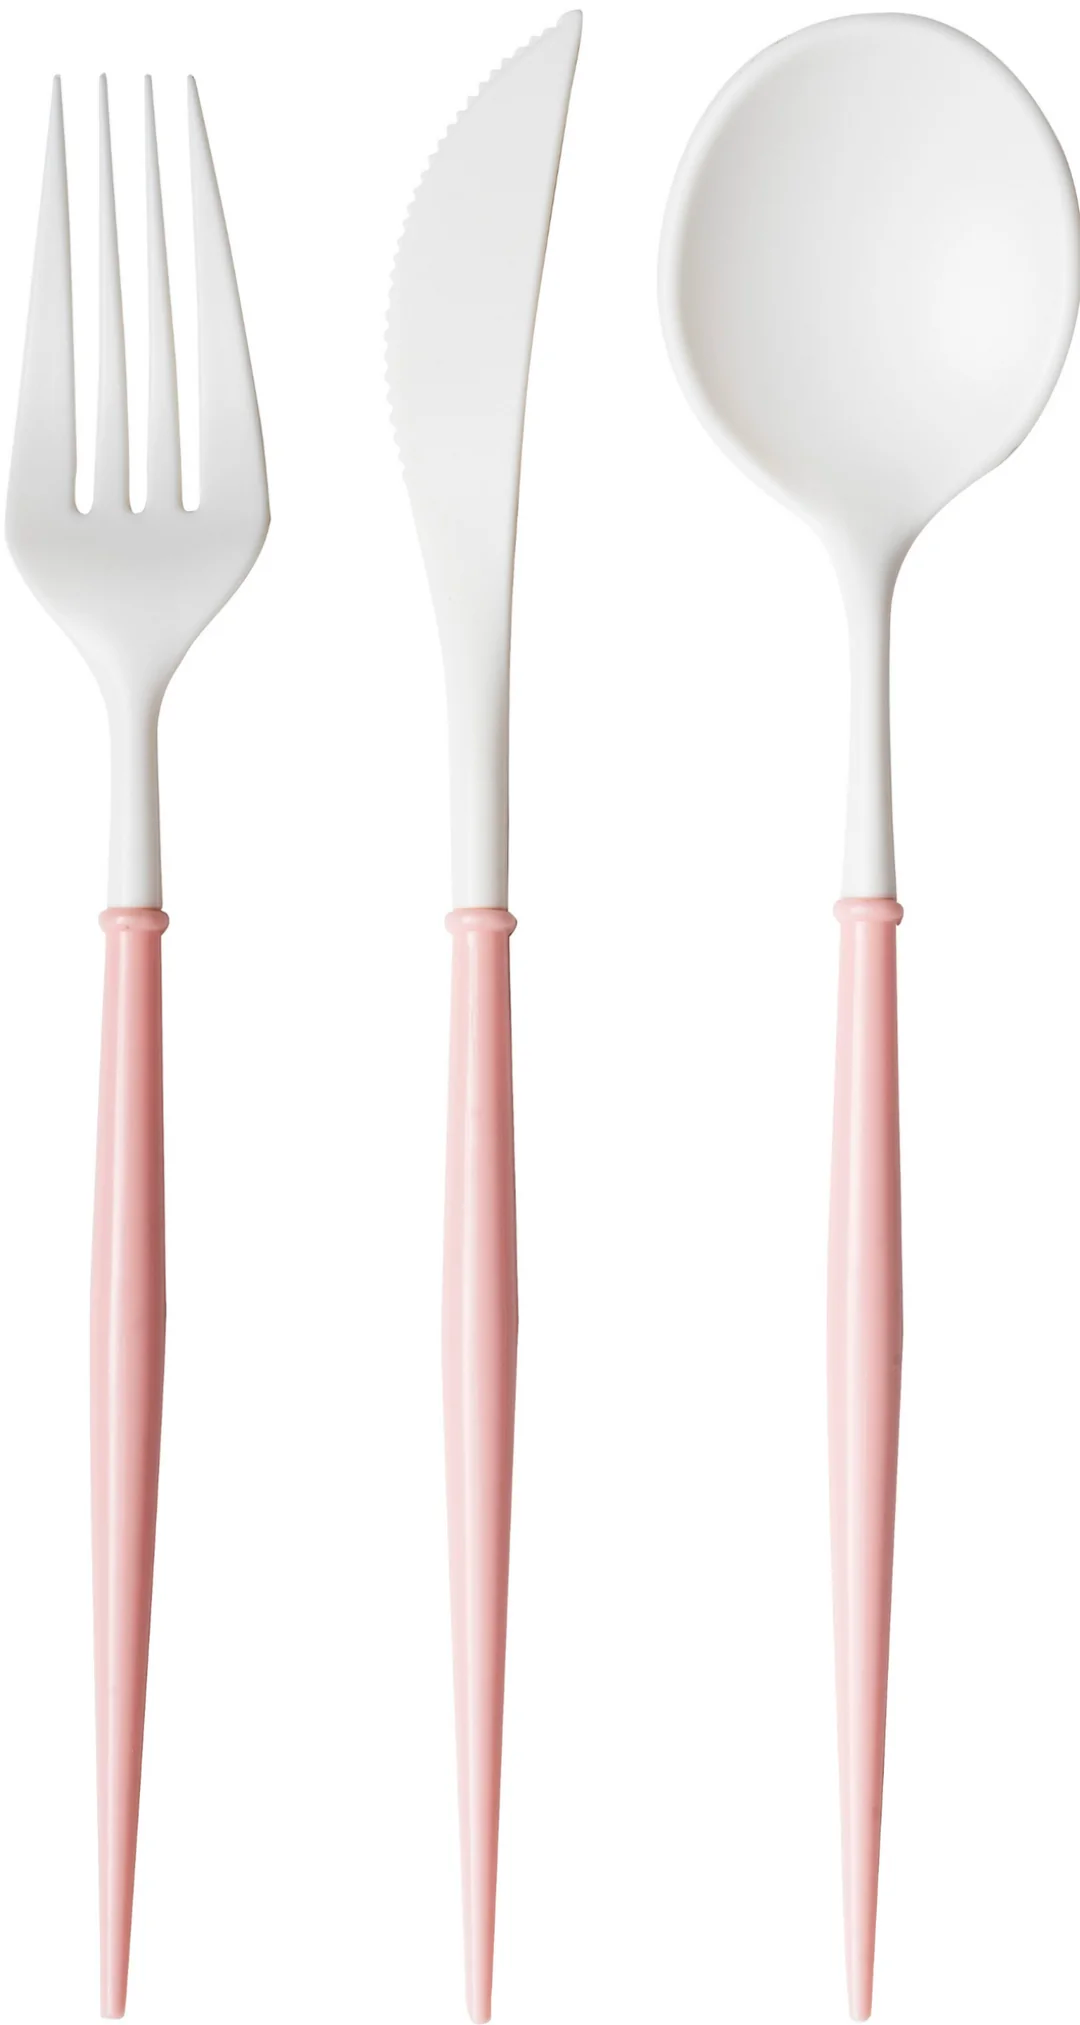 Blush & White Bella Assorted Plastic Cutlery - 24pc, Service for 8 - Set With Style